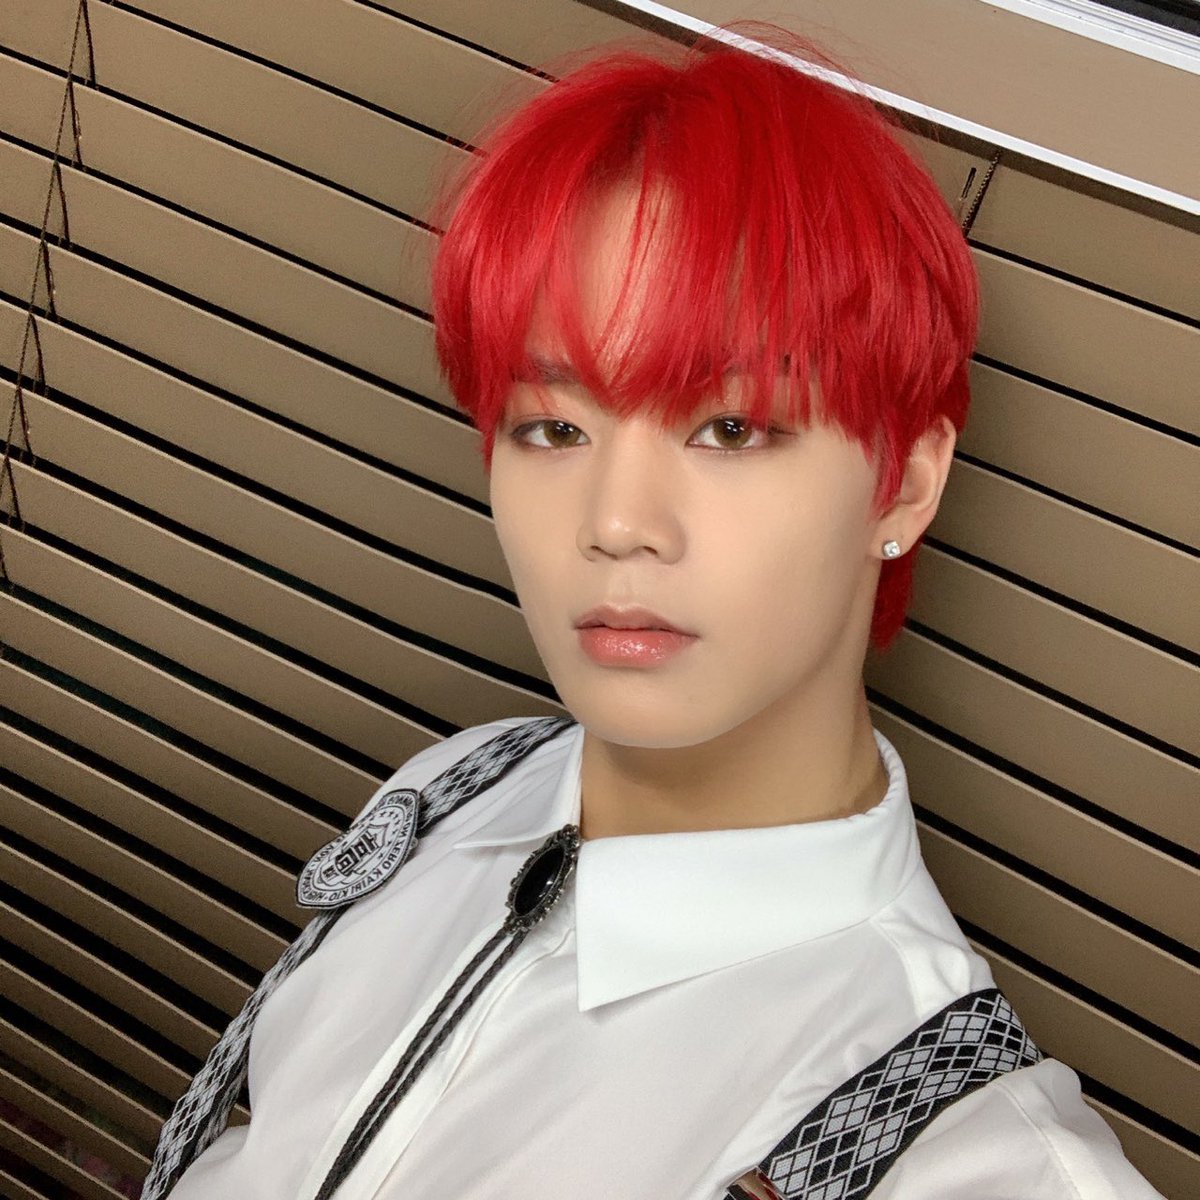 Image for [On] Red hair photo I haven't seen in a long time!! Did you enjoy Weekly Idol today? 💕💕 T1419 ON https://t.co/HtMNMnZRNN